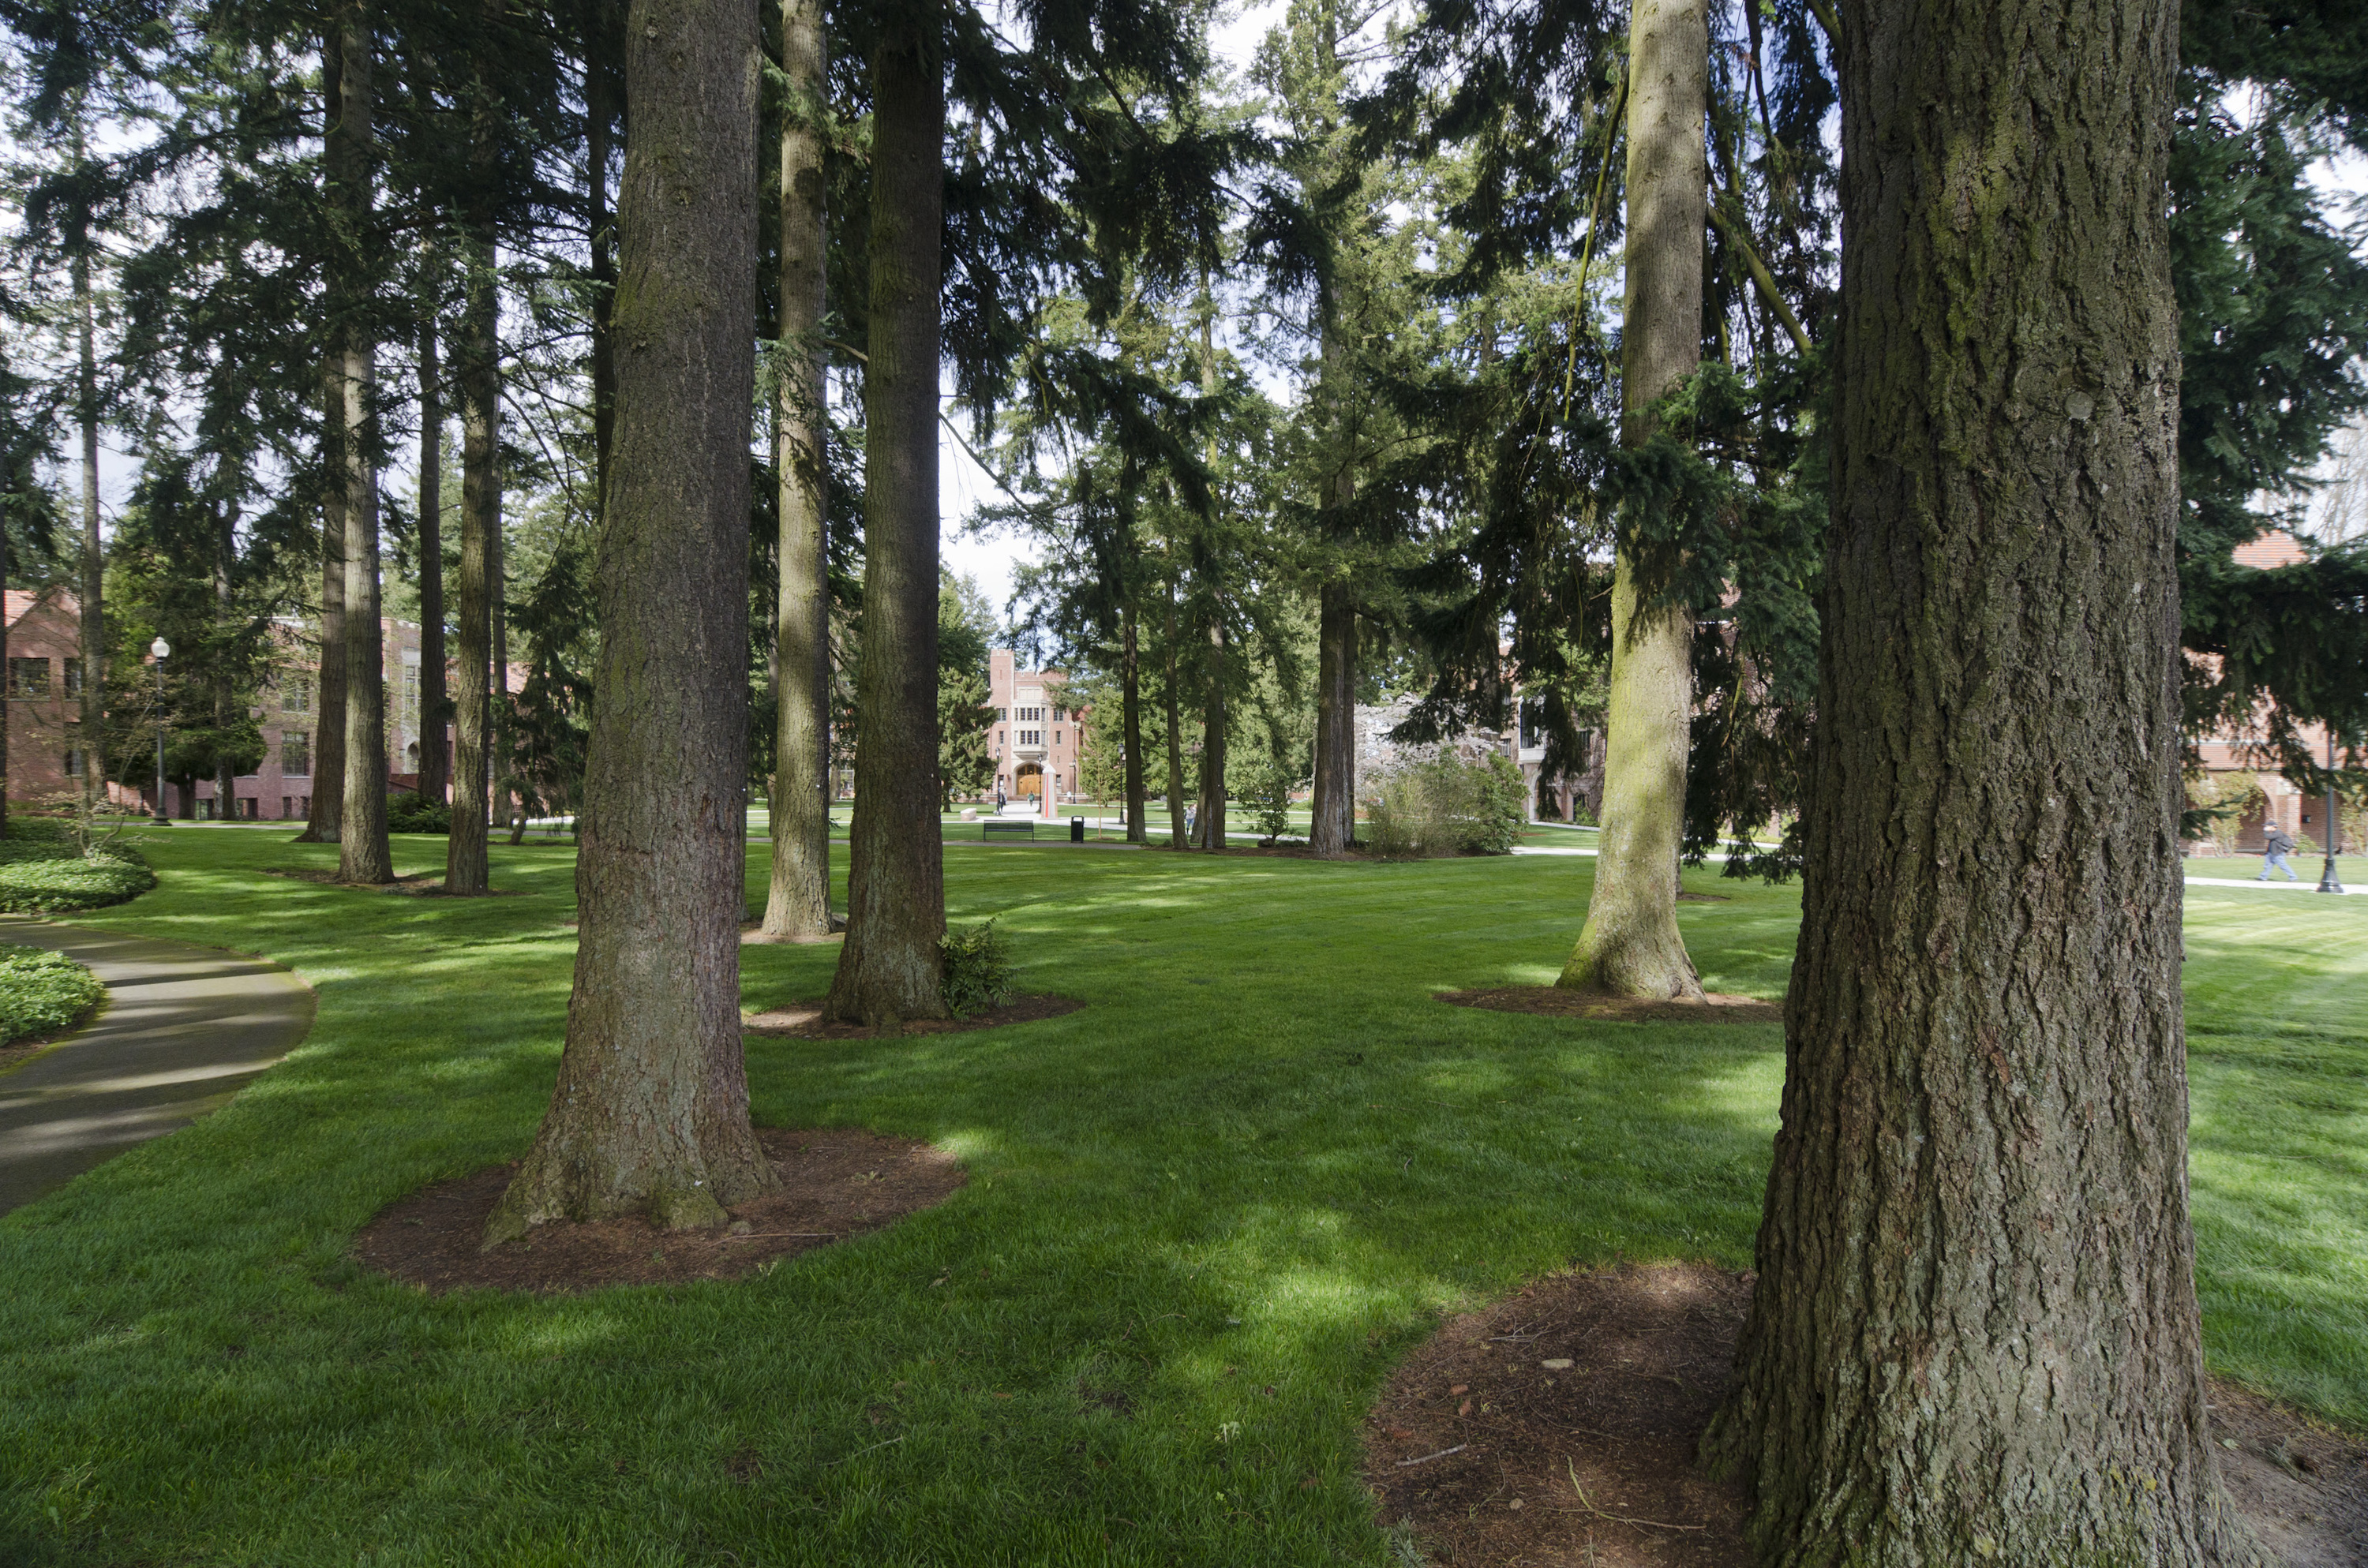 Green grass and trees in front of campus buildings